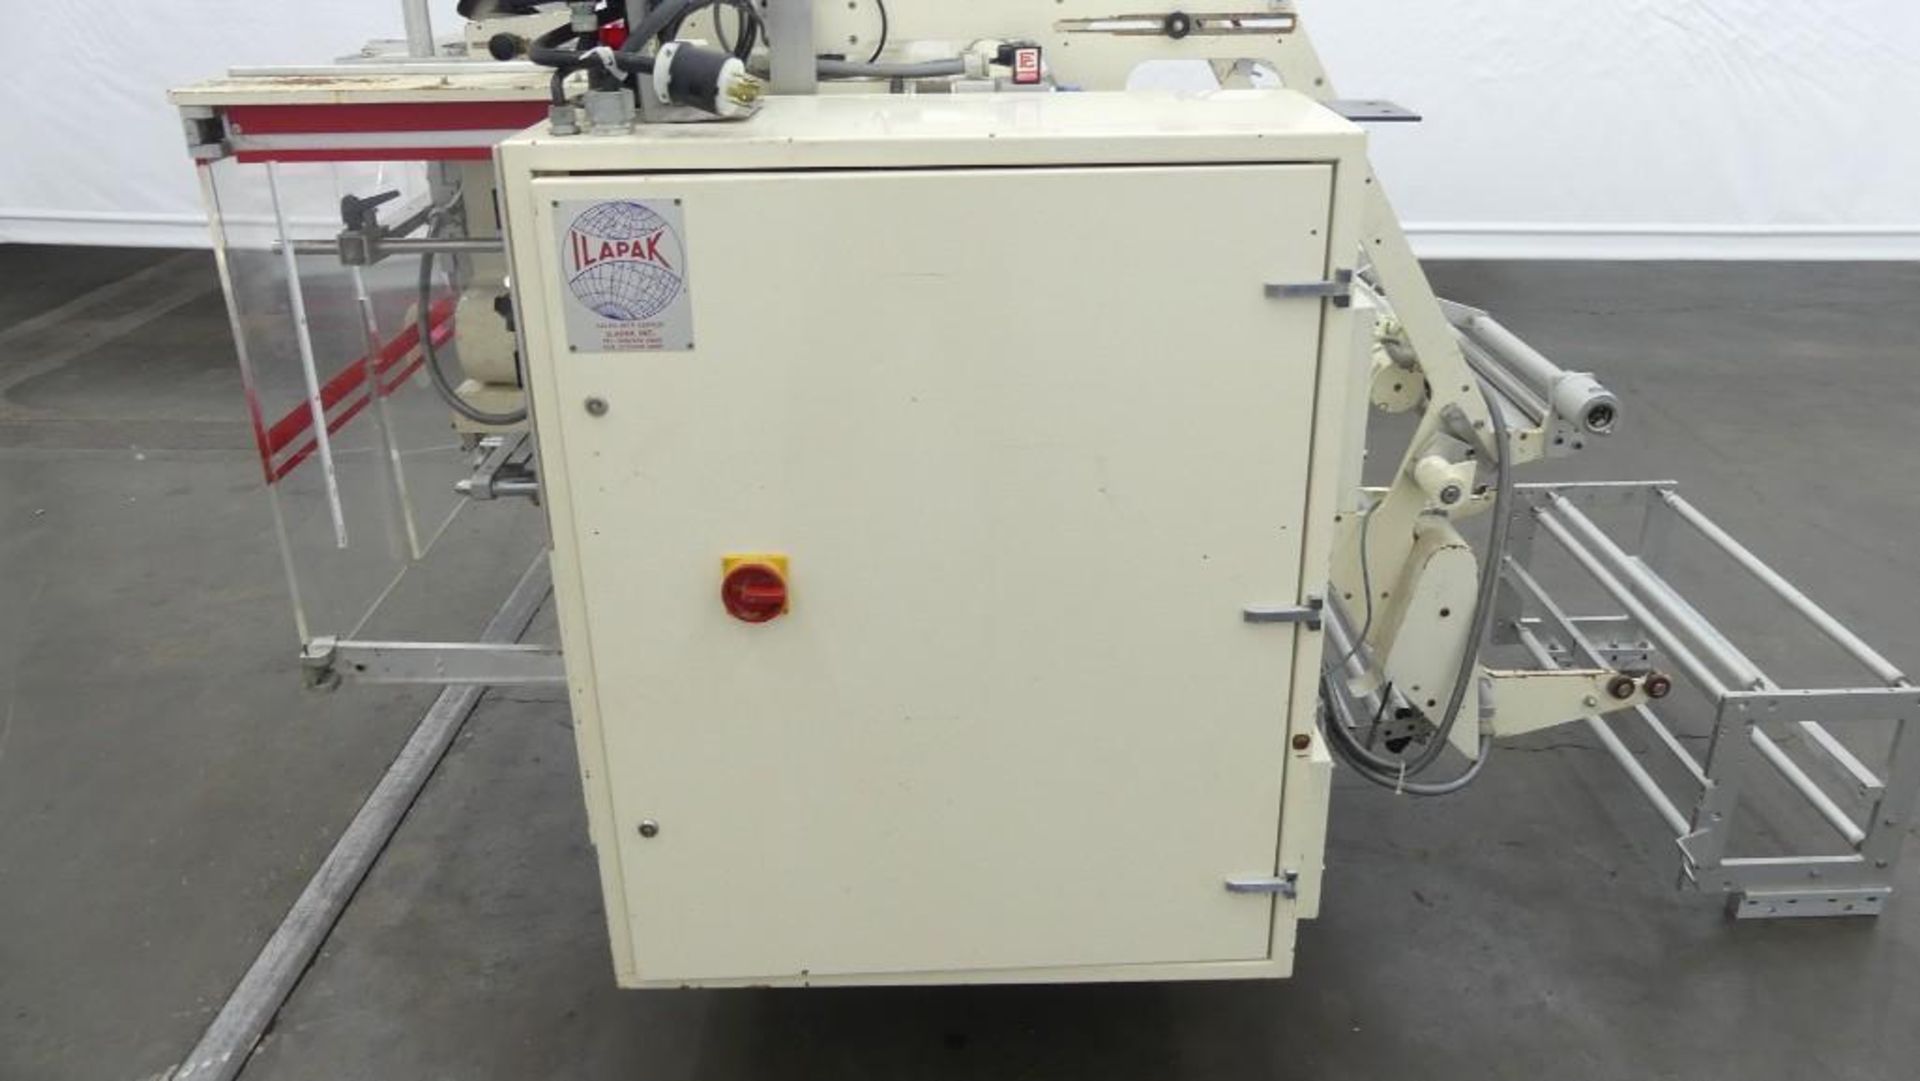 Illapak Vegatronic 300S Vertical Form Fill and Seal - Image 8 of 12